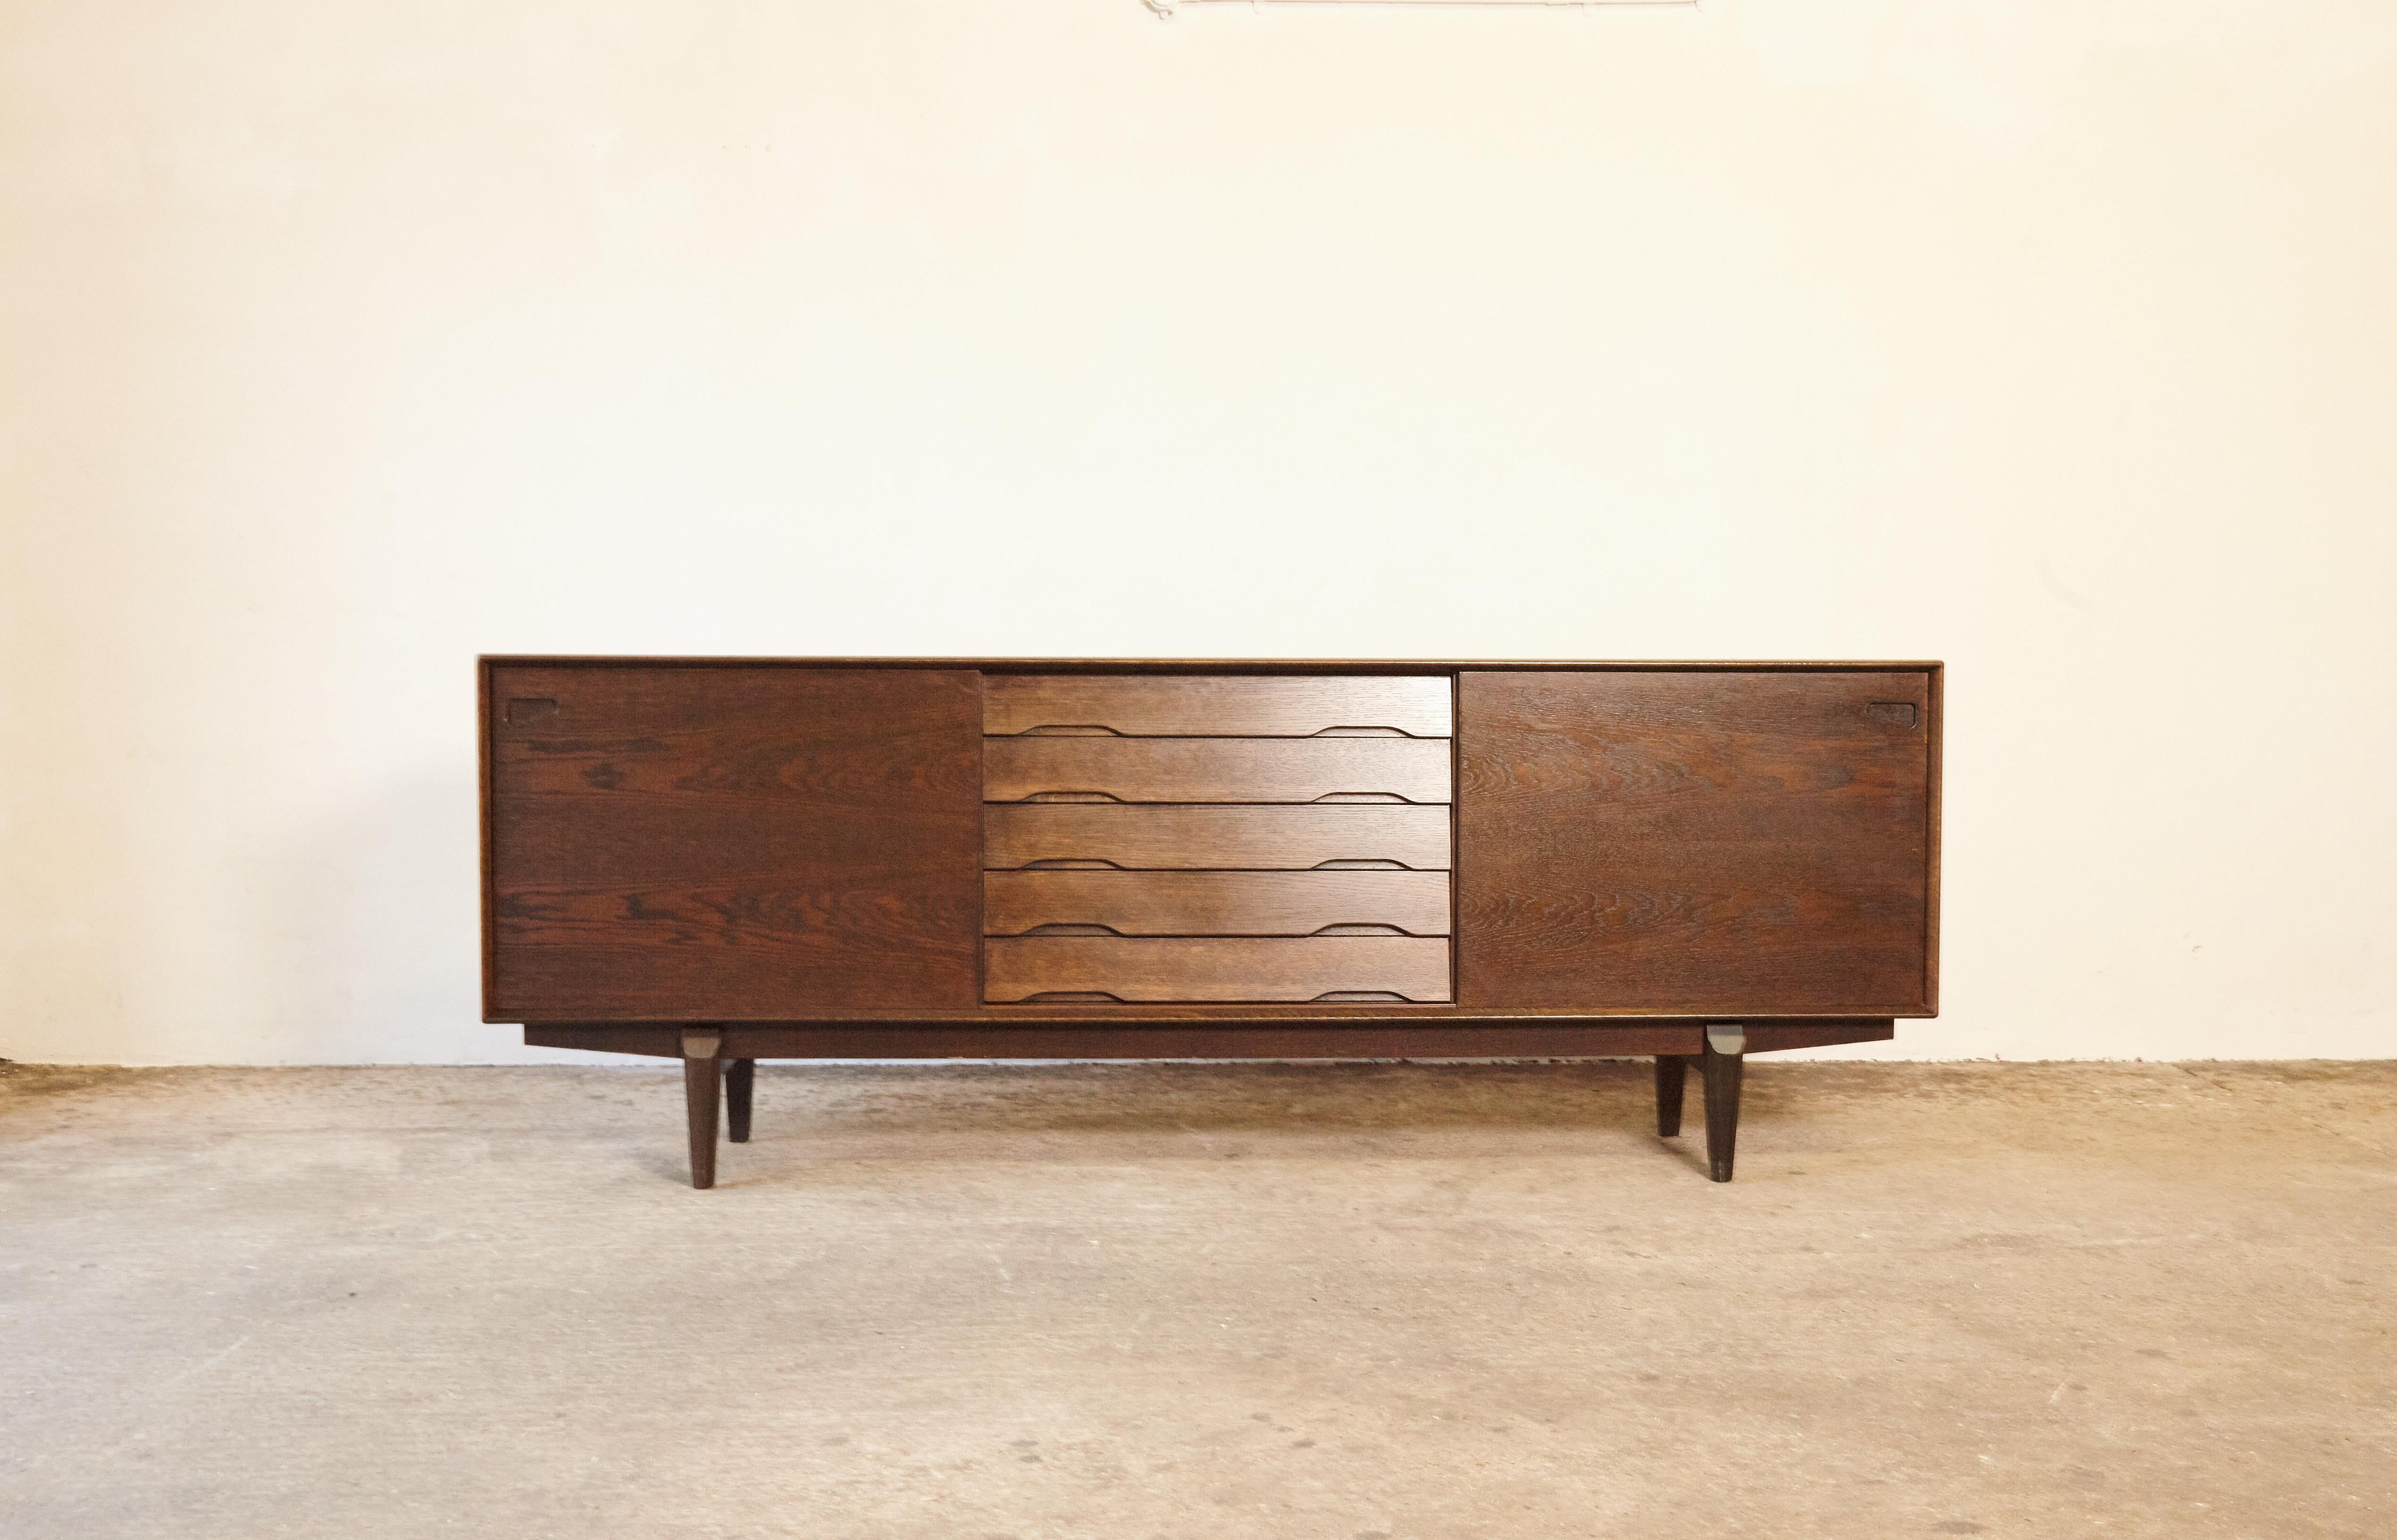 Beautiful Danish midcentury No. 65 sideboard by Skovby Mobler. In stained oak, with five drawers and two sliding door on the front and the inside with shelves. More photos coming soon. Ships worldwide - please contact us directly for a